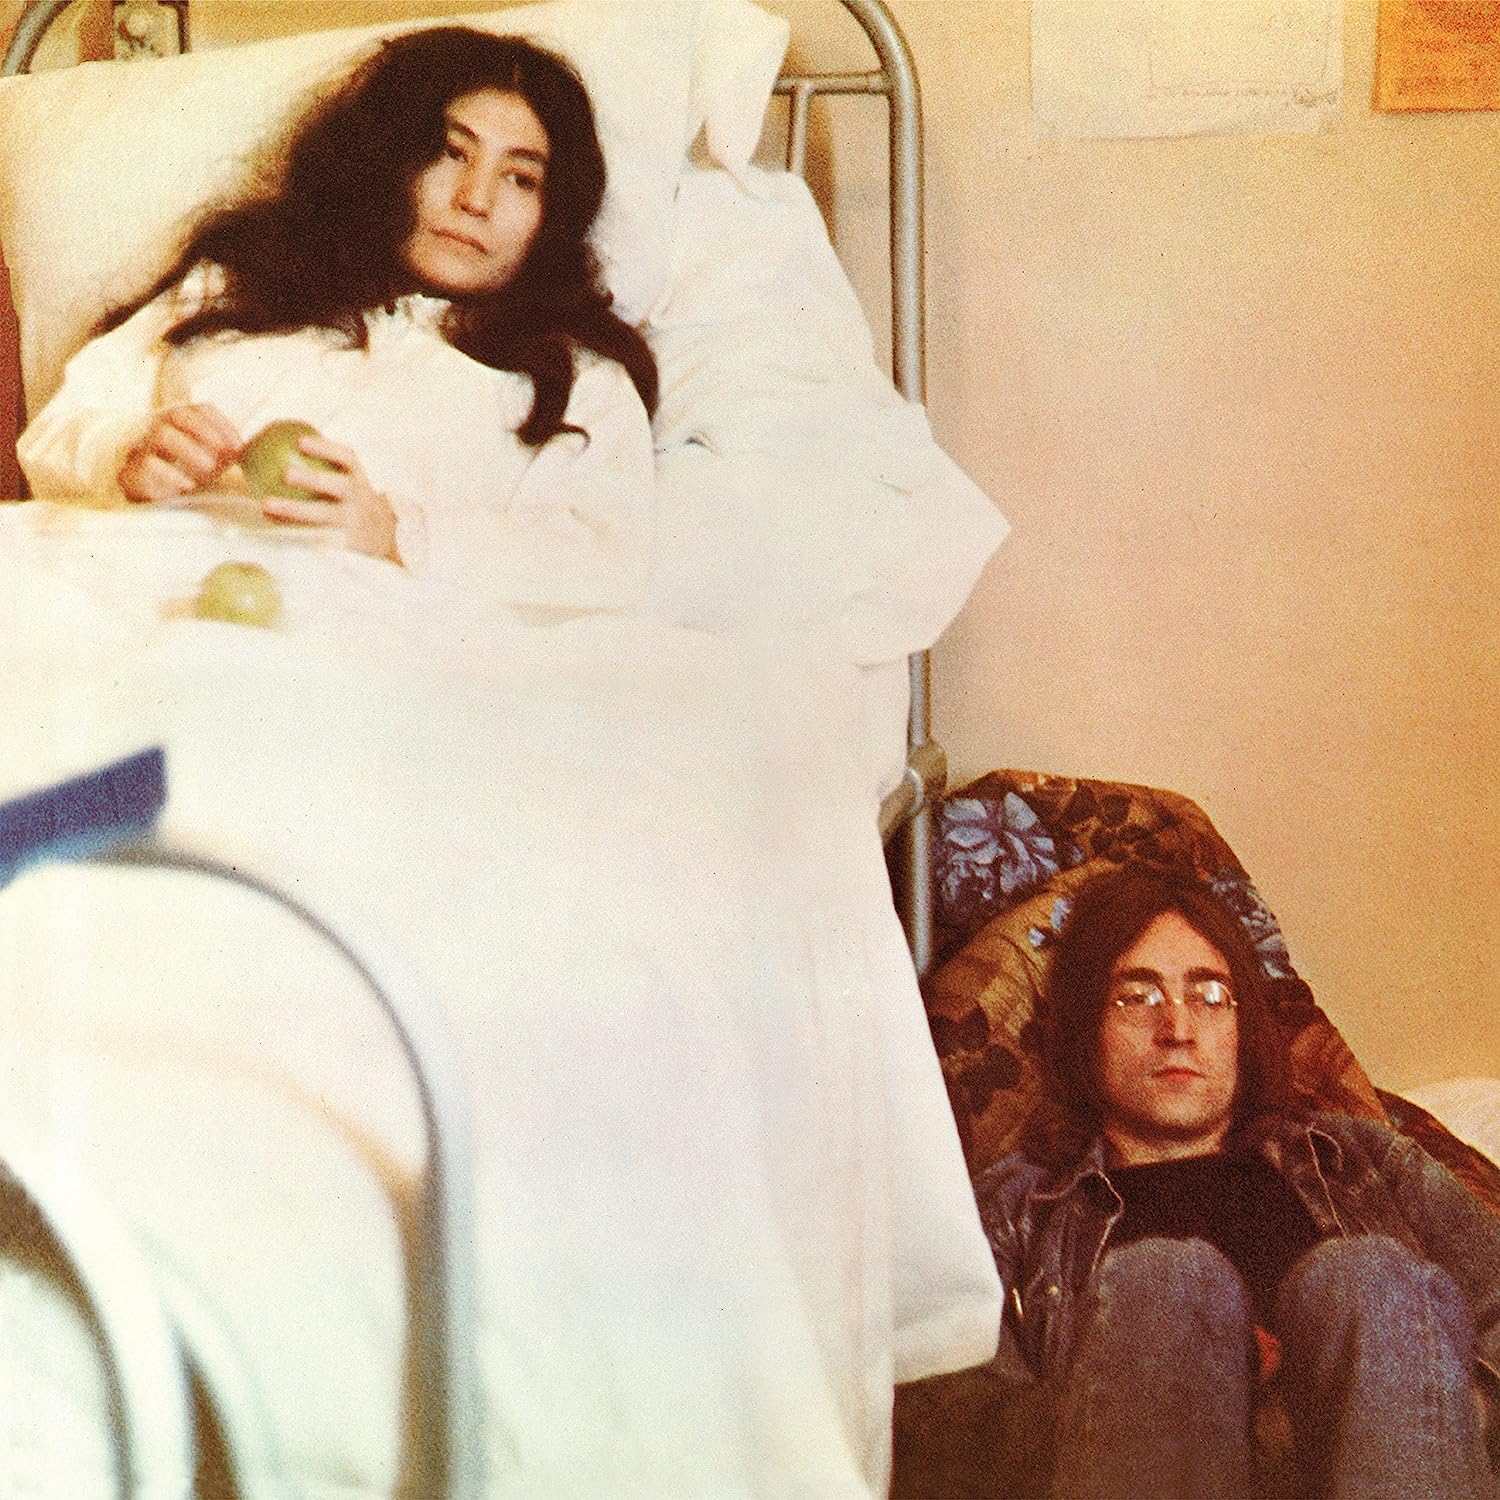 Unfinished Music No. 2: Life With The Lions | John Lennon, Yoko Ono